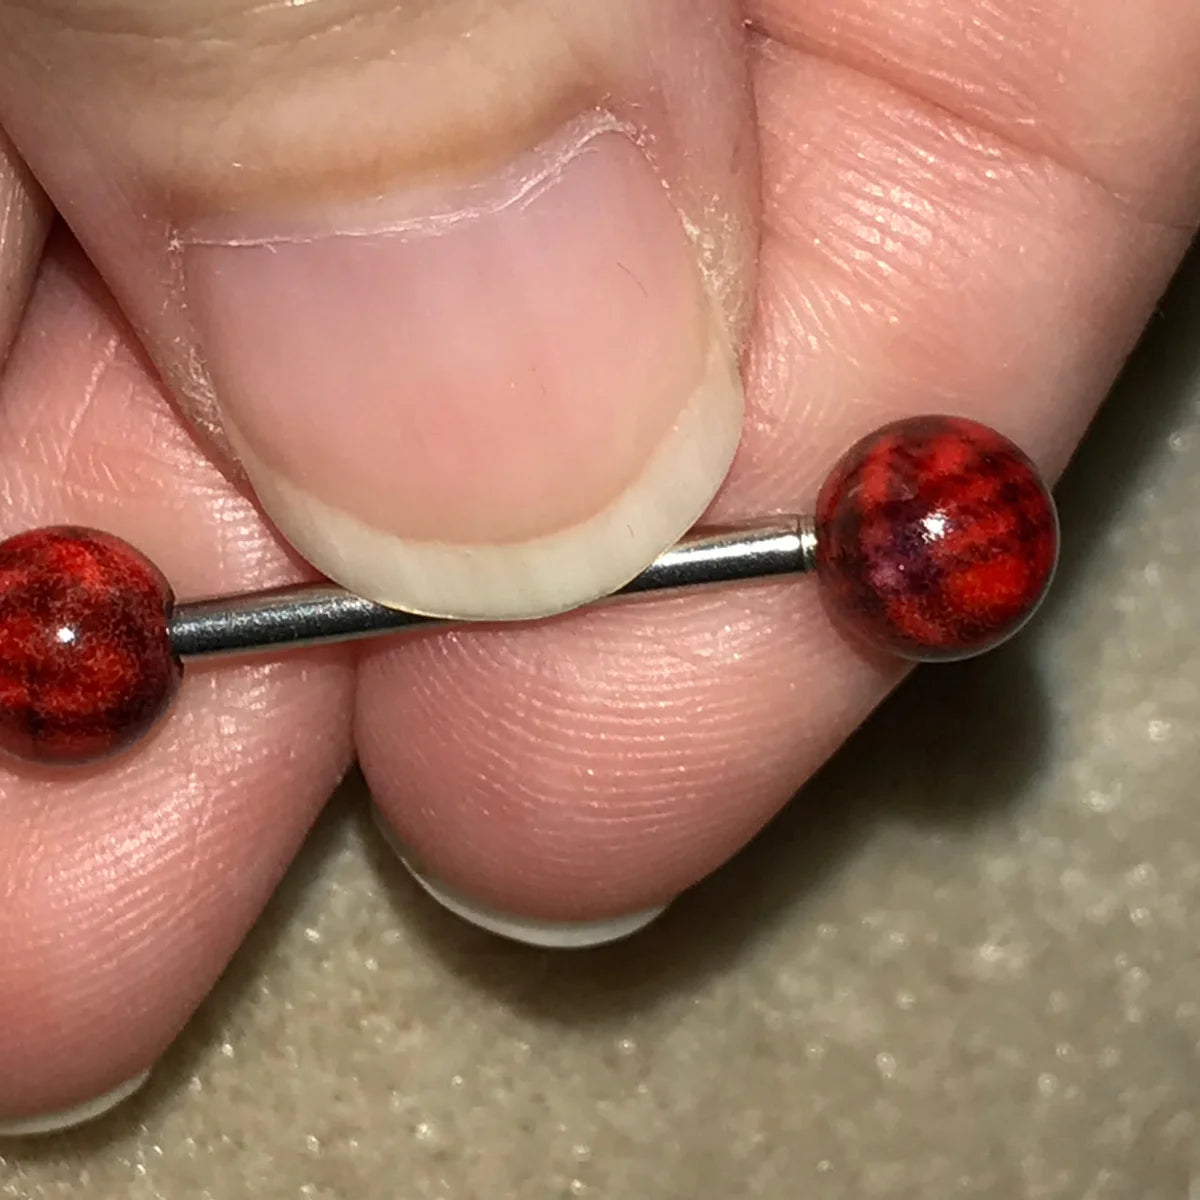 14 Gauge Red and Black Plaid Tongue Ring